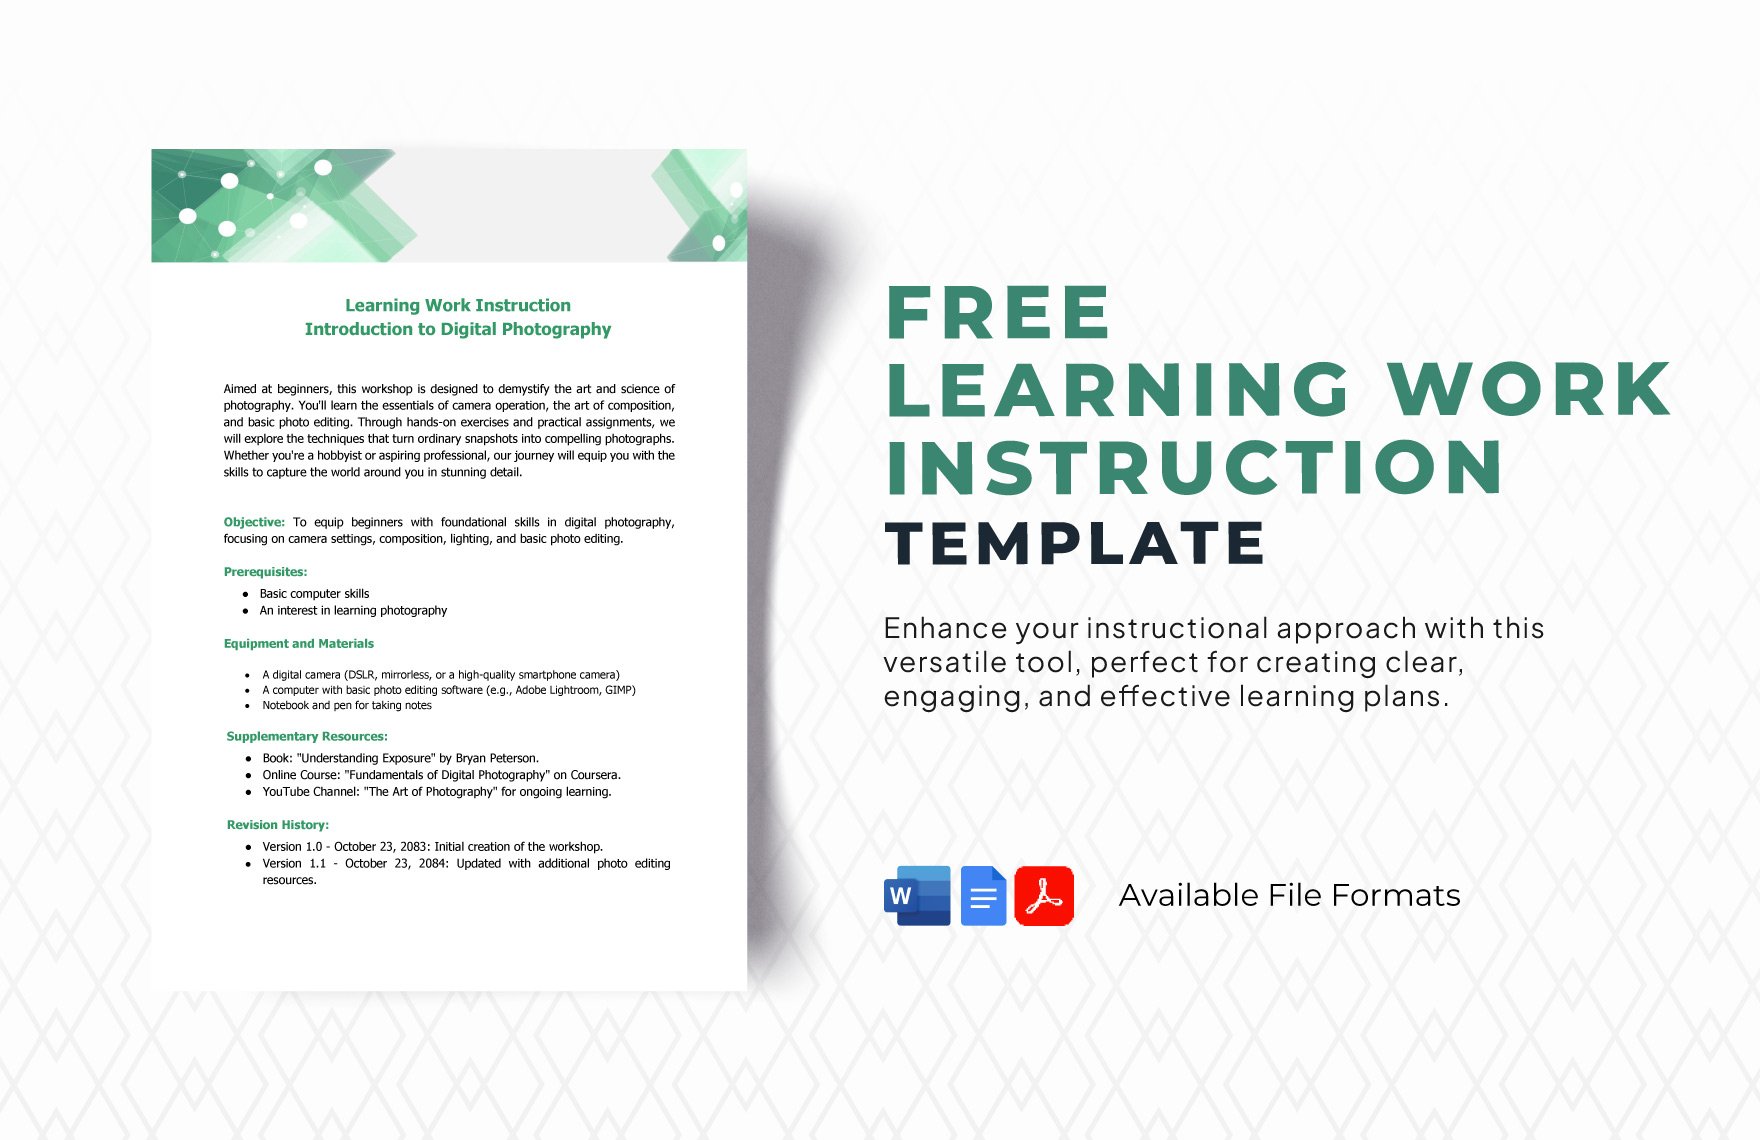 Free Learning Work Instruction Template